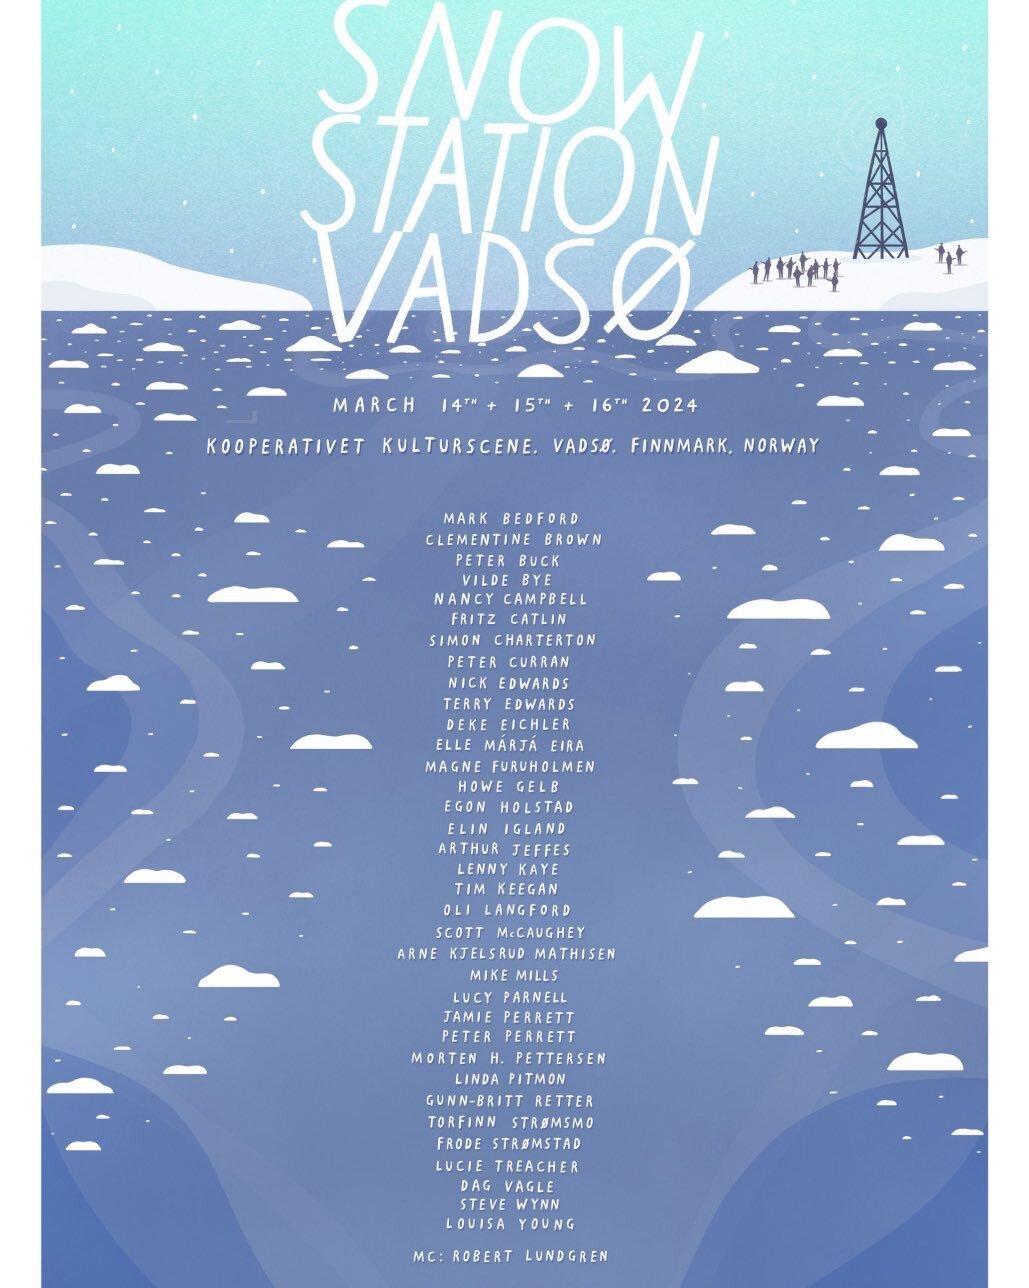 A few of us are heading North for this&hellip; can&rsquo;t wait! #northpole @arktictoc @snowstationvads&oslash;